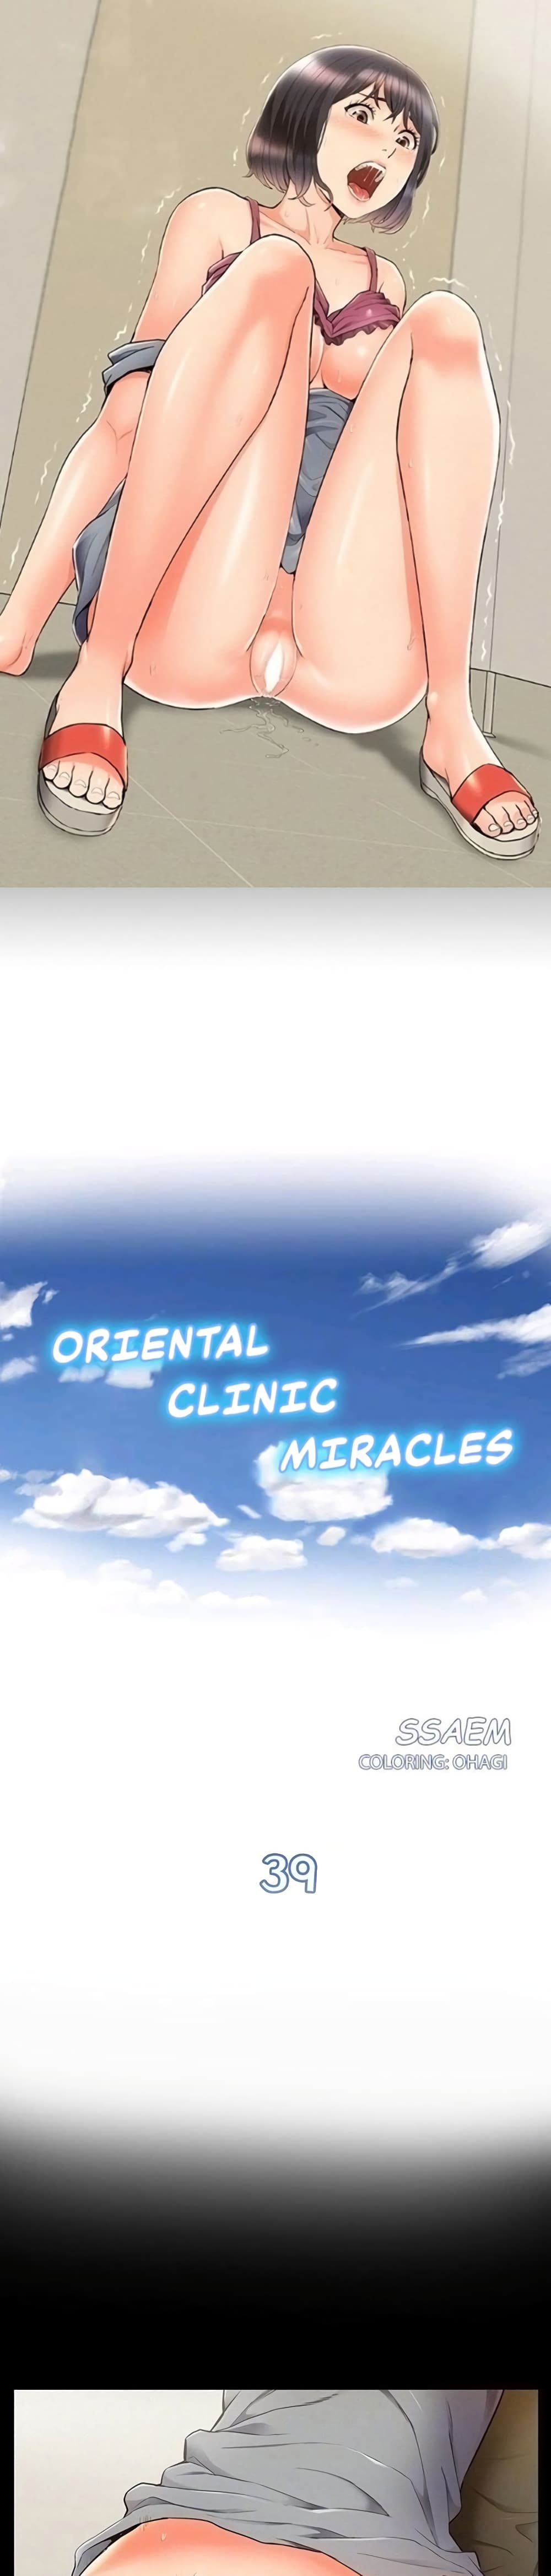 Oriental Clinic Miracles 39-39